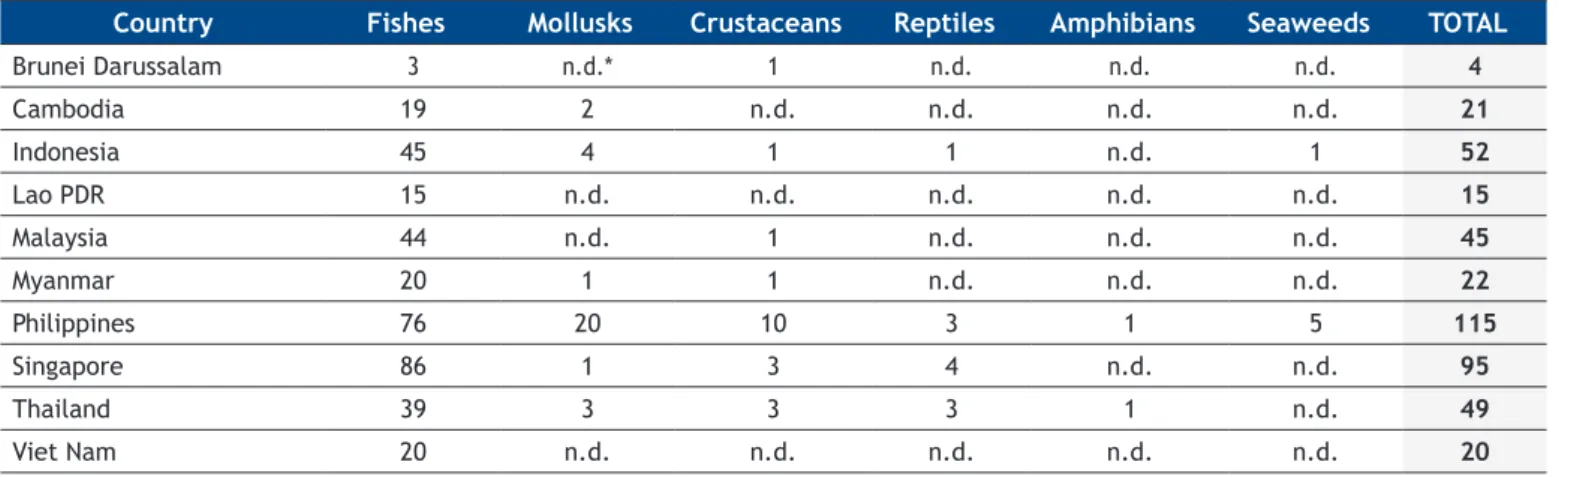 Table 1. Aquatic species introductions in Southeast Asia (data based on FAO DIAS)